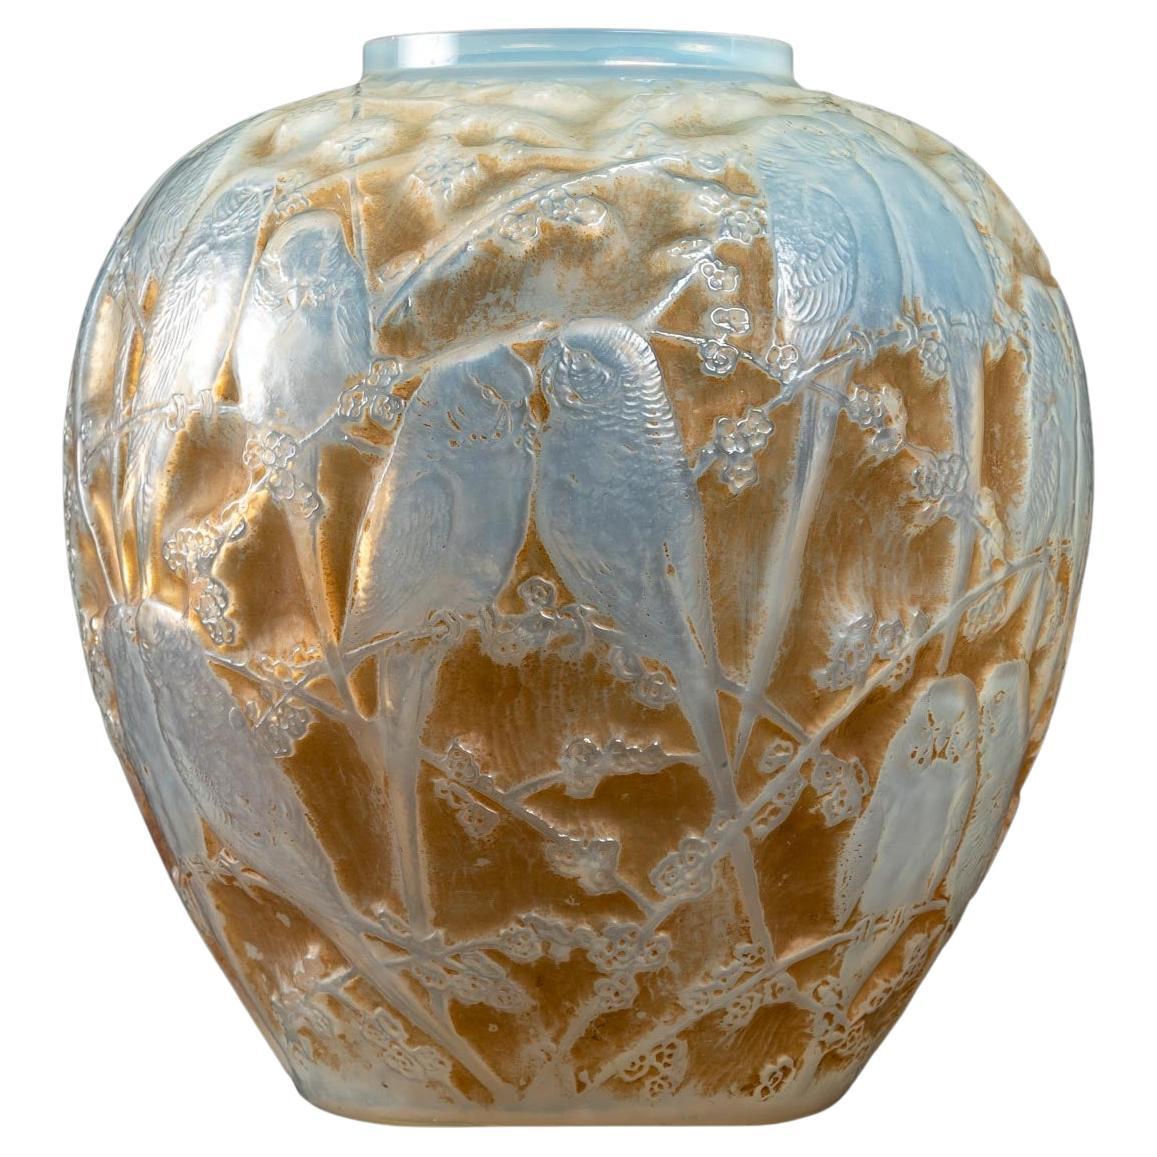 1919 Rene Lalique Perruches Vase Triple Cased Opalescent Glass with Sepia Patina